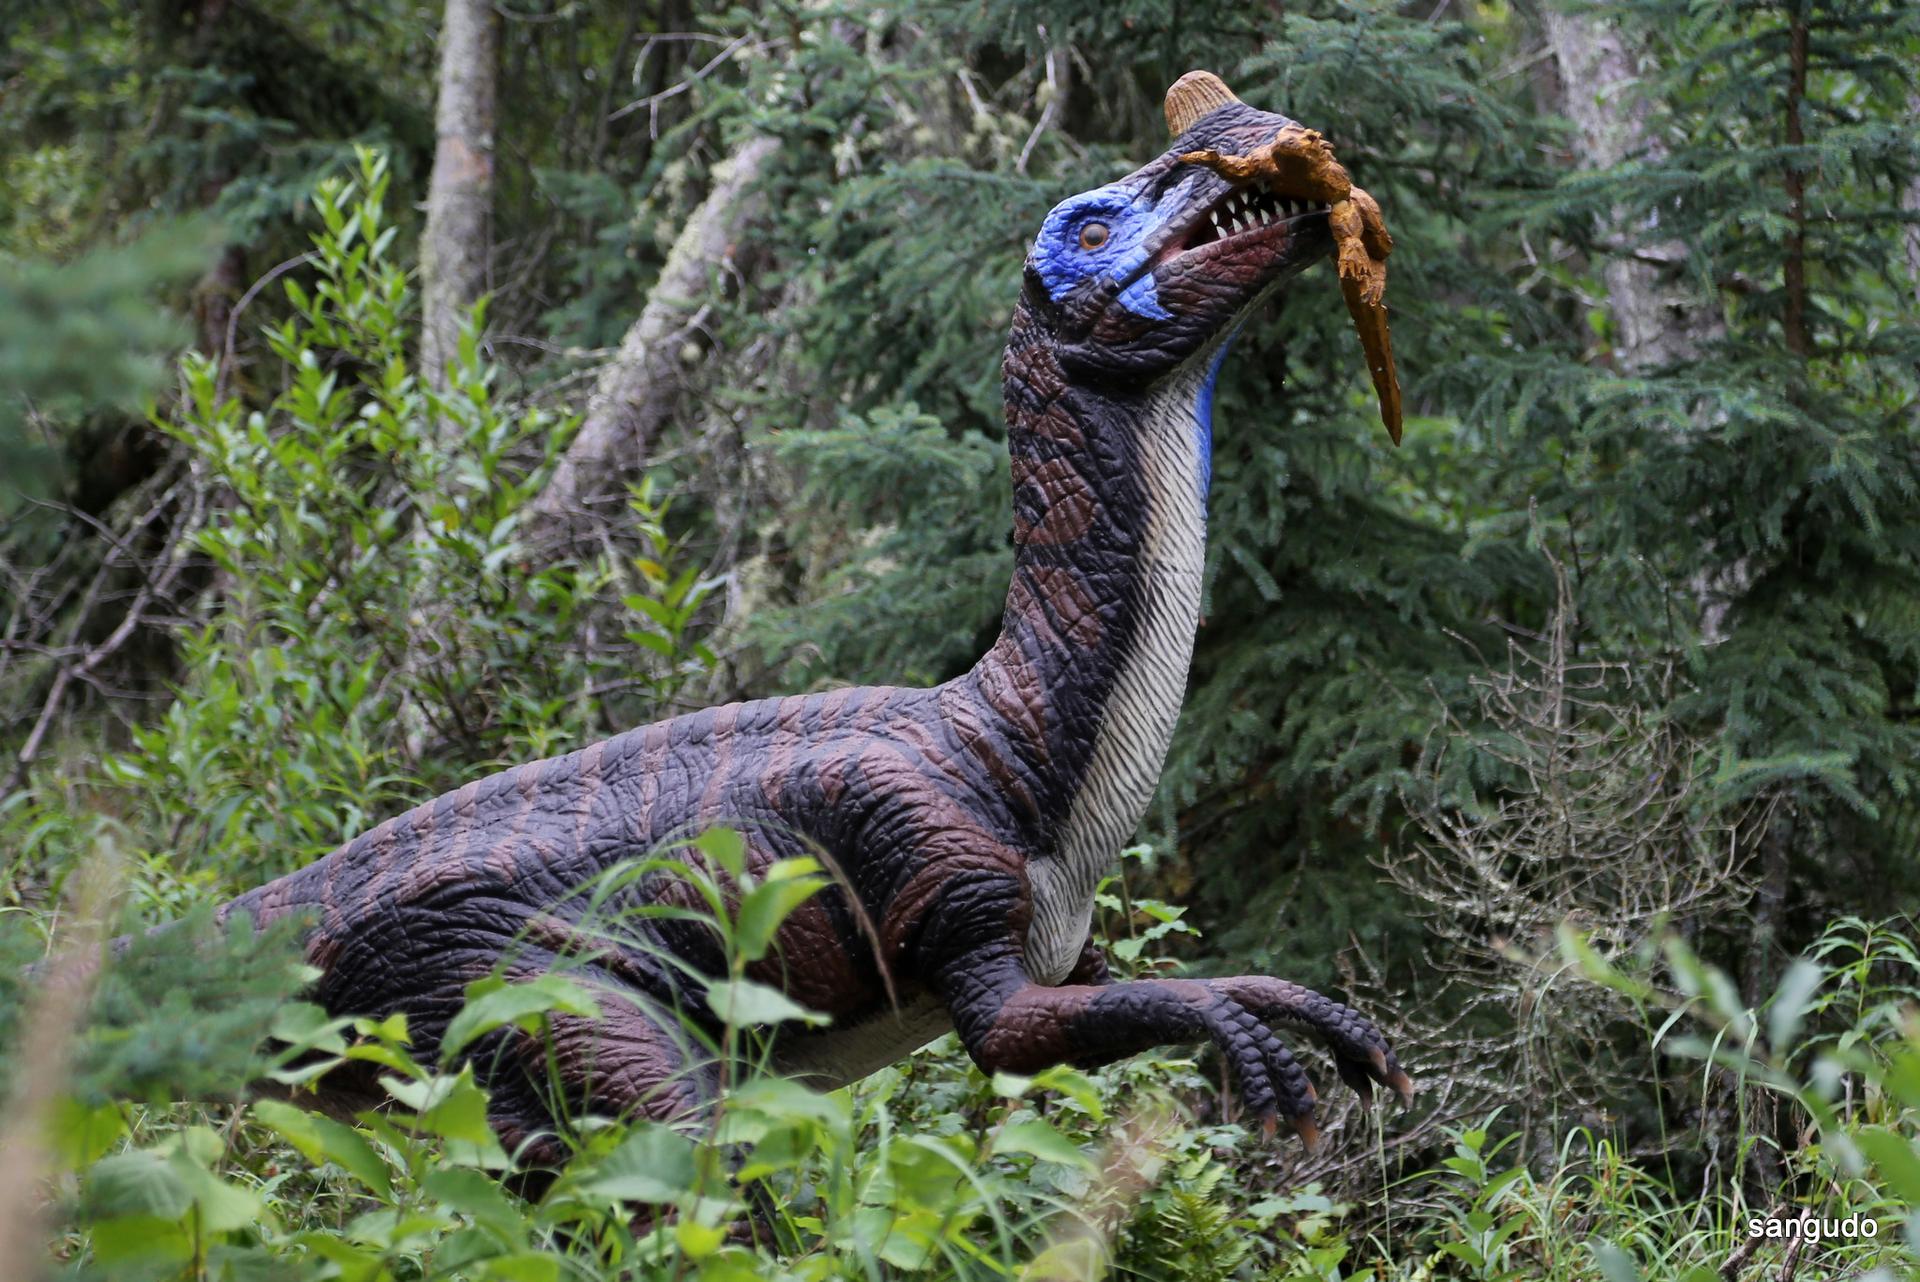 A dinosaur statue at the Jurassic Forest park in Alberta, Canada.